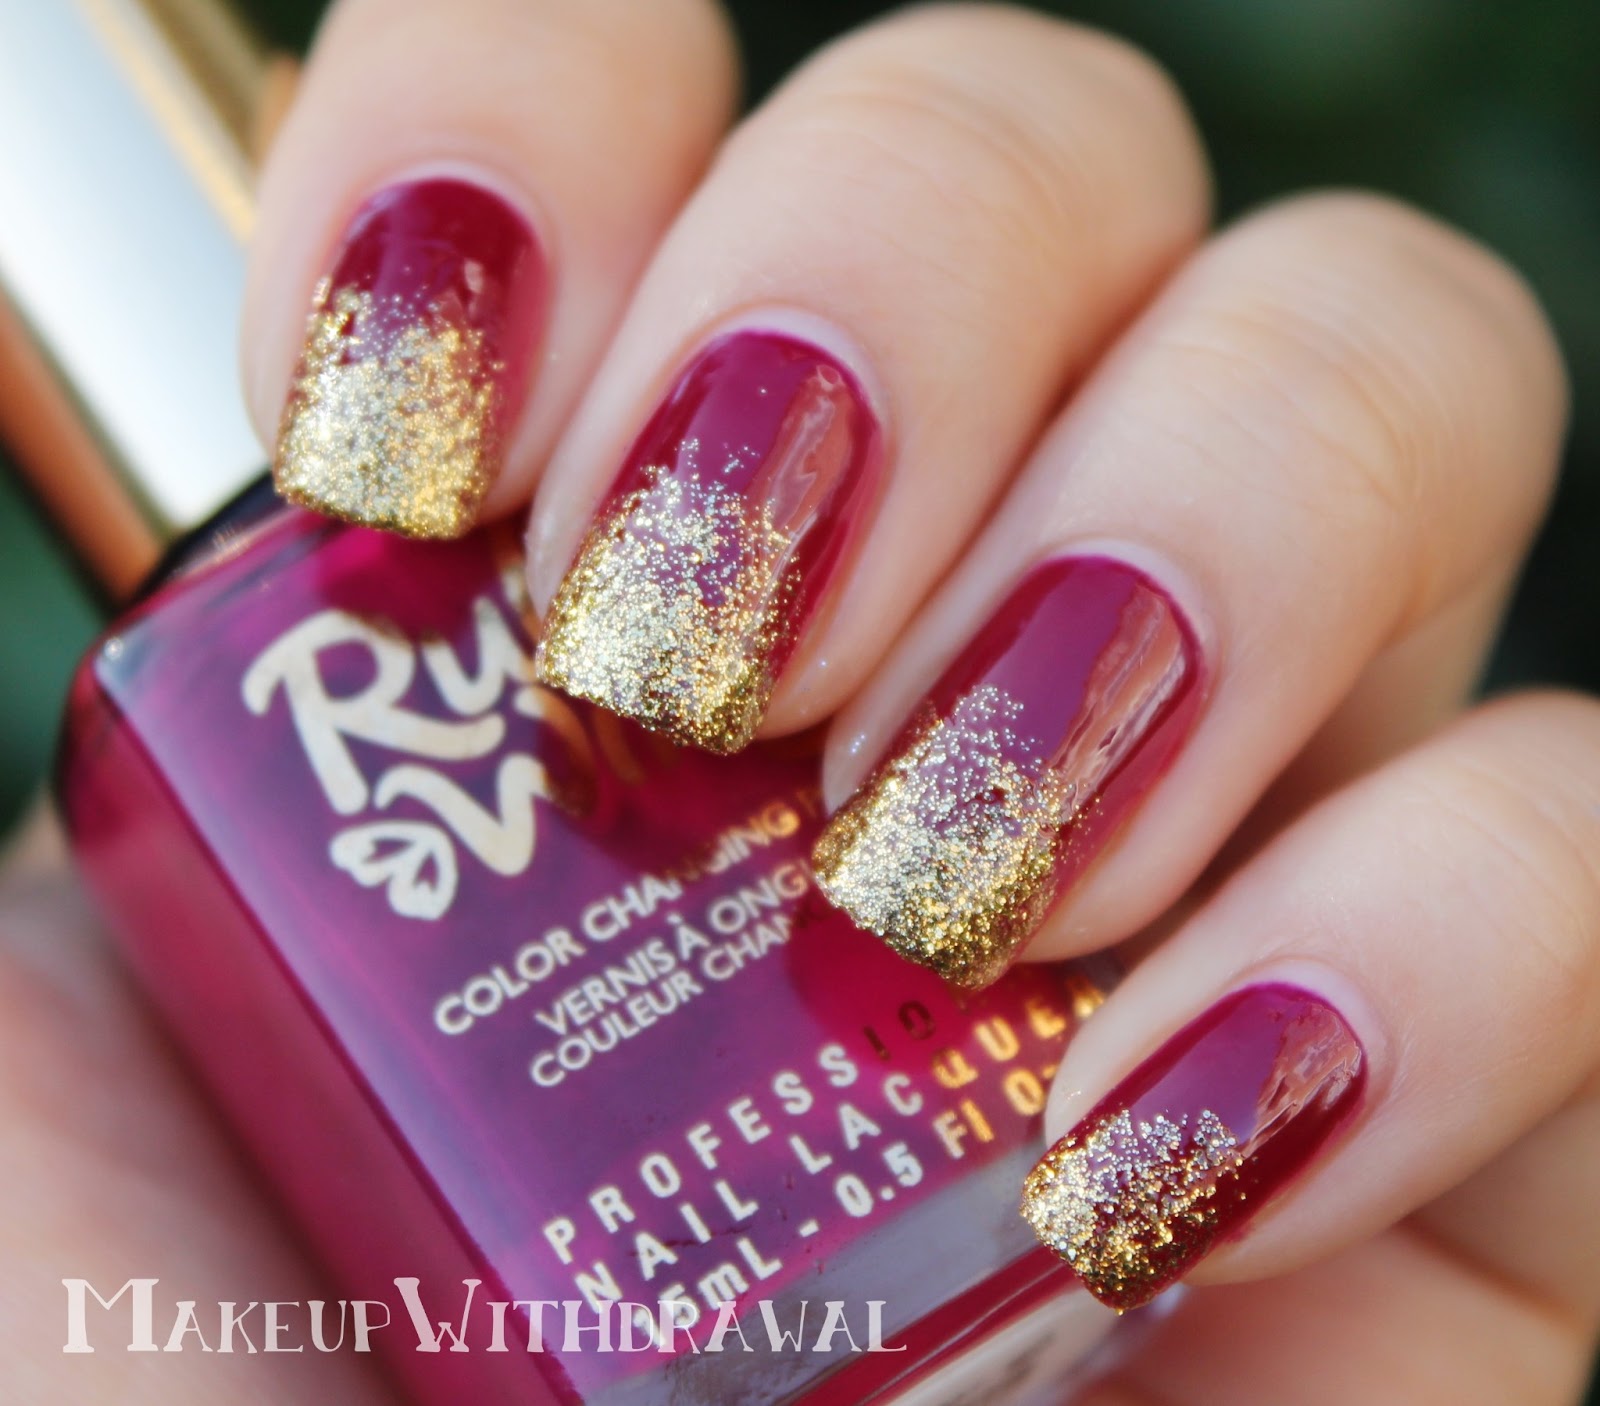 Ruby Wing Poppy & Sunflower Manicure, Review | Makeup Withdrawal